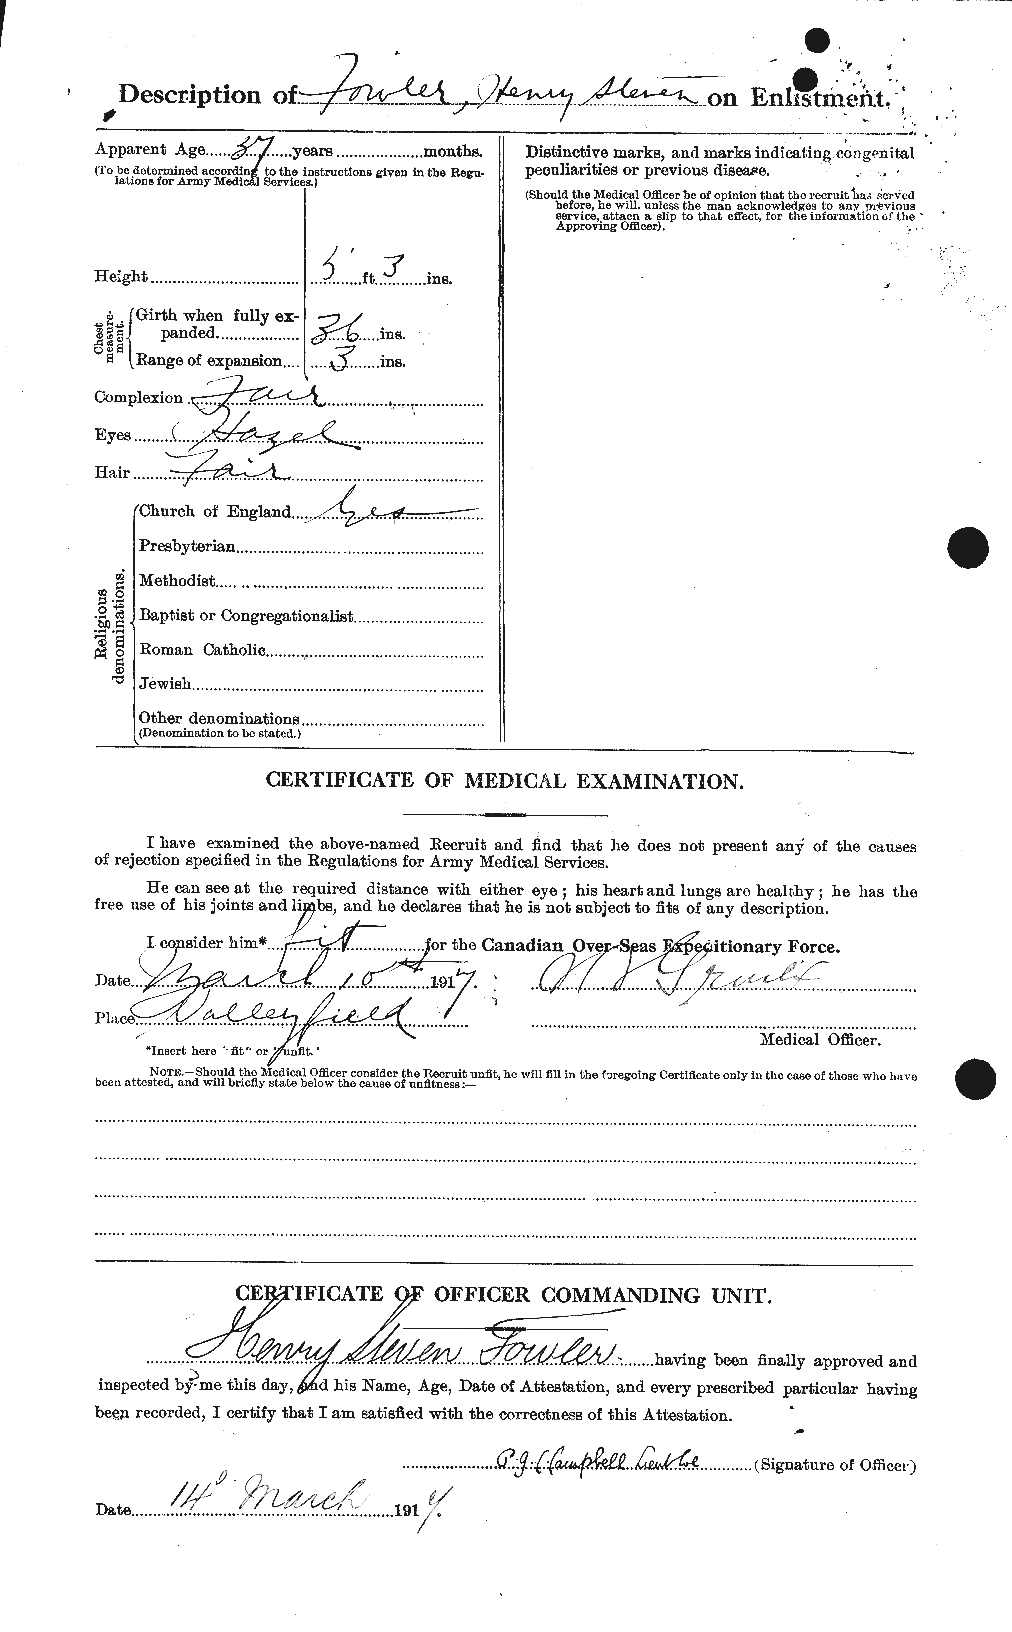 Personnel Records of the First World War - CEF 333084b